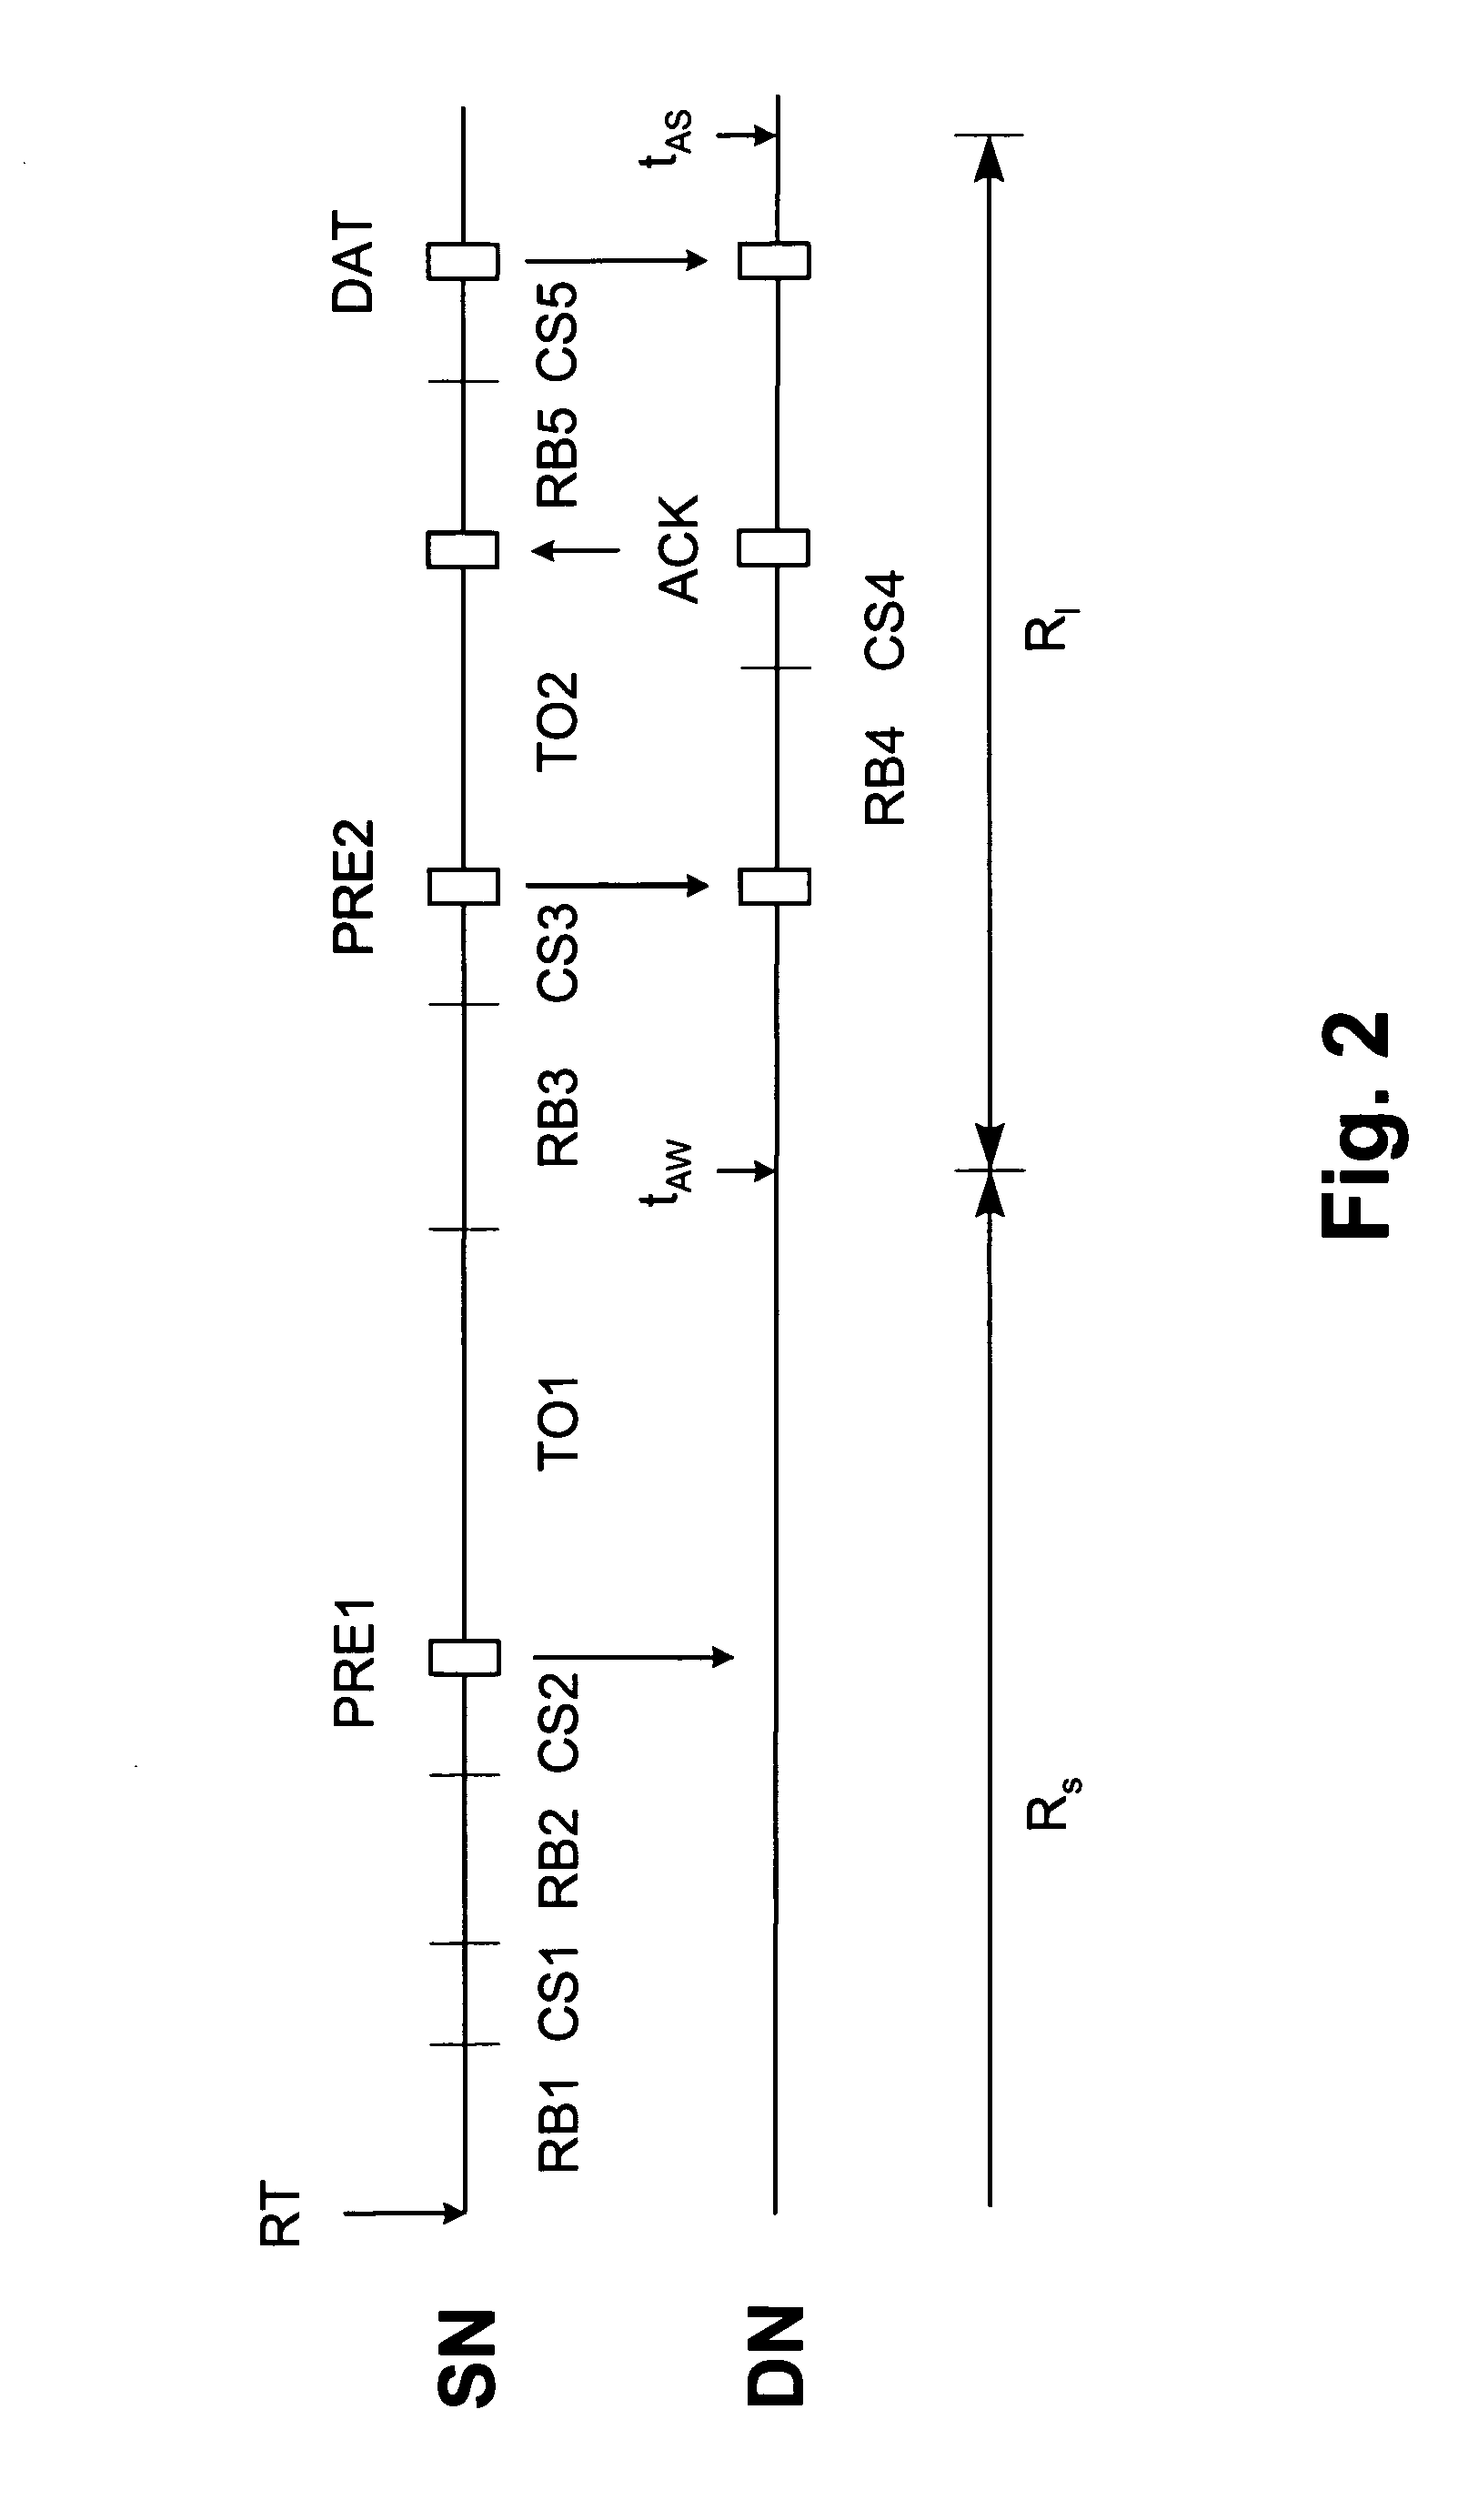 Method for Setting the Operation of a Routing Node of an Asynchronous Wireless Communication Network, Network Node and Communication Network Implementing the Method